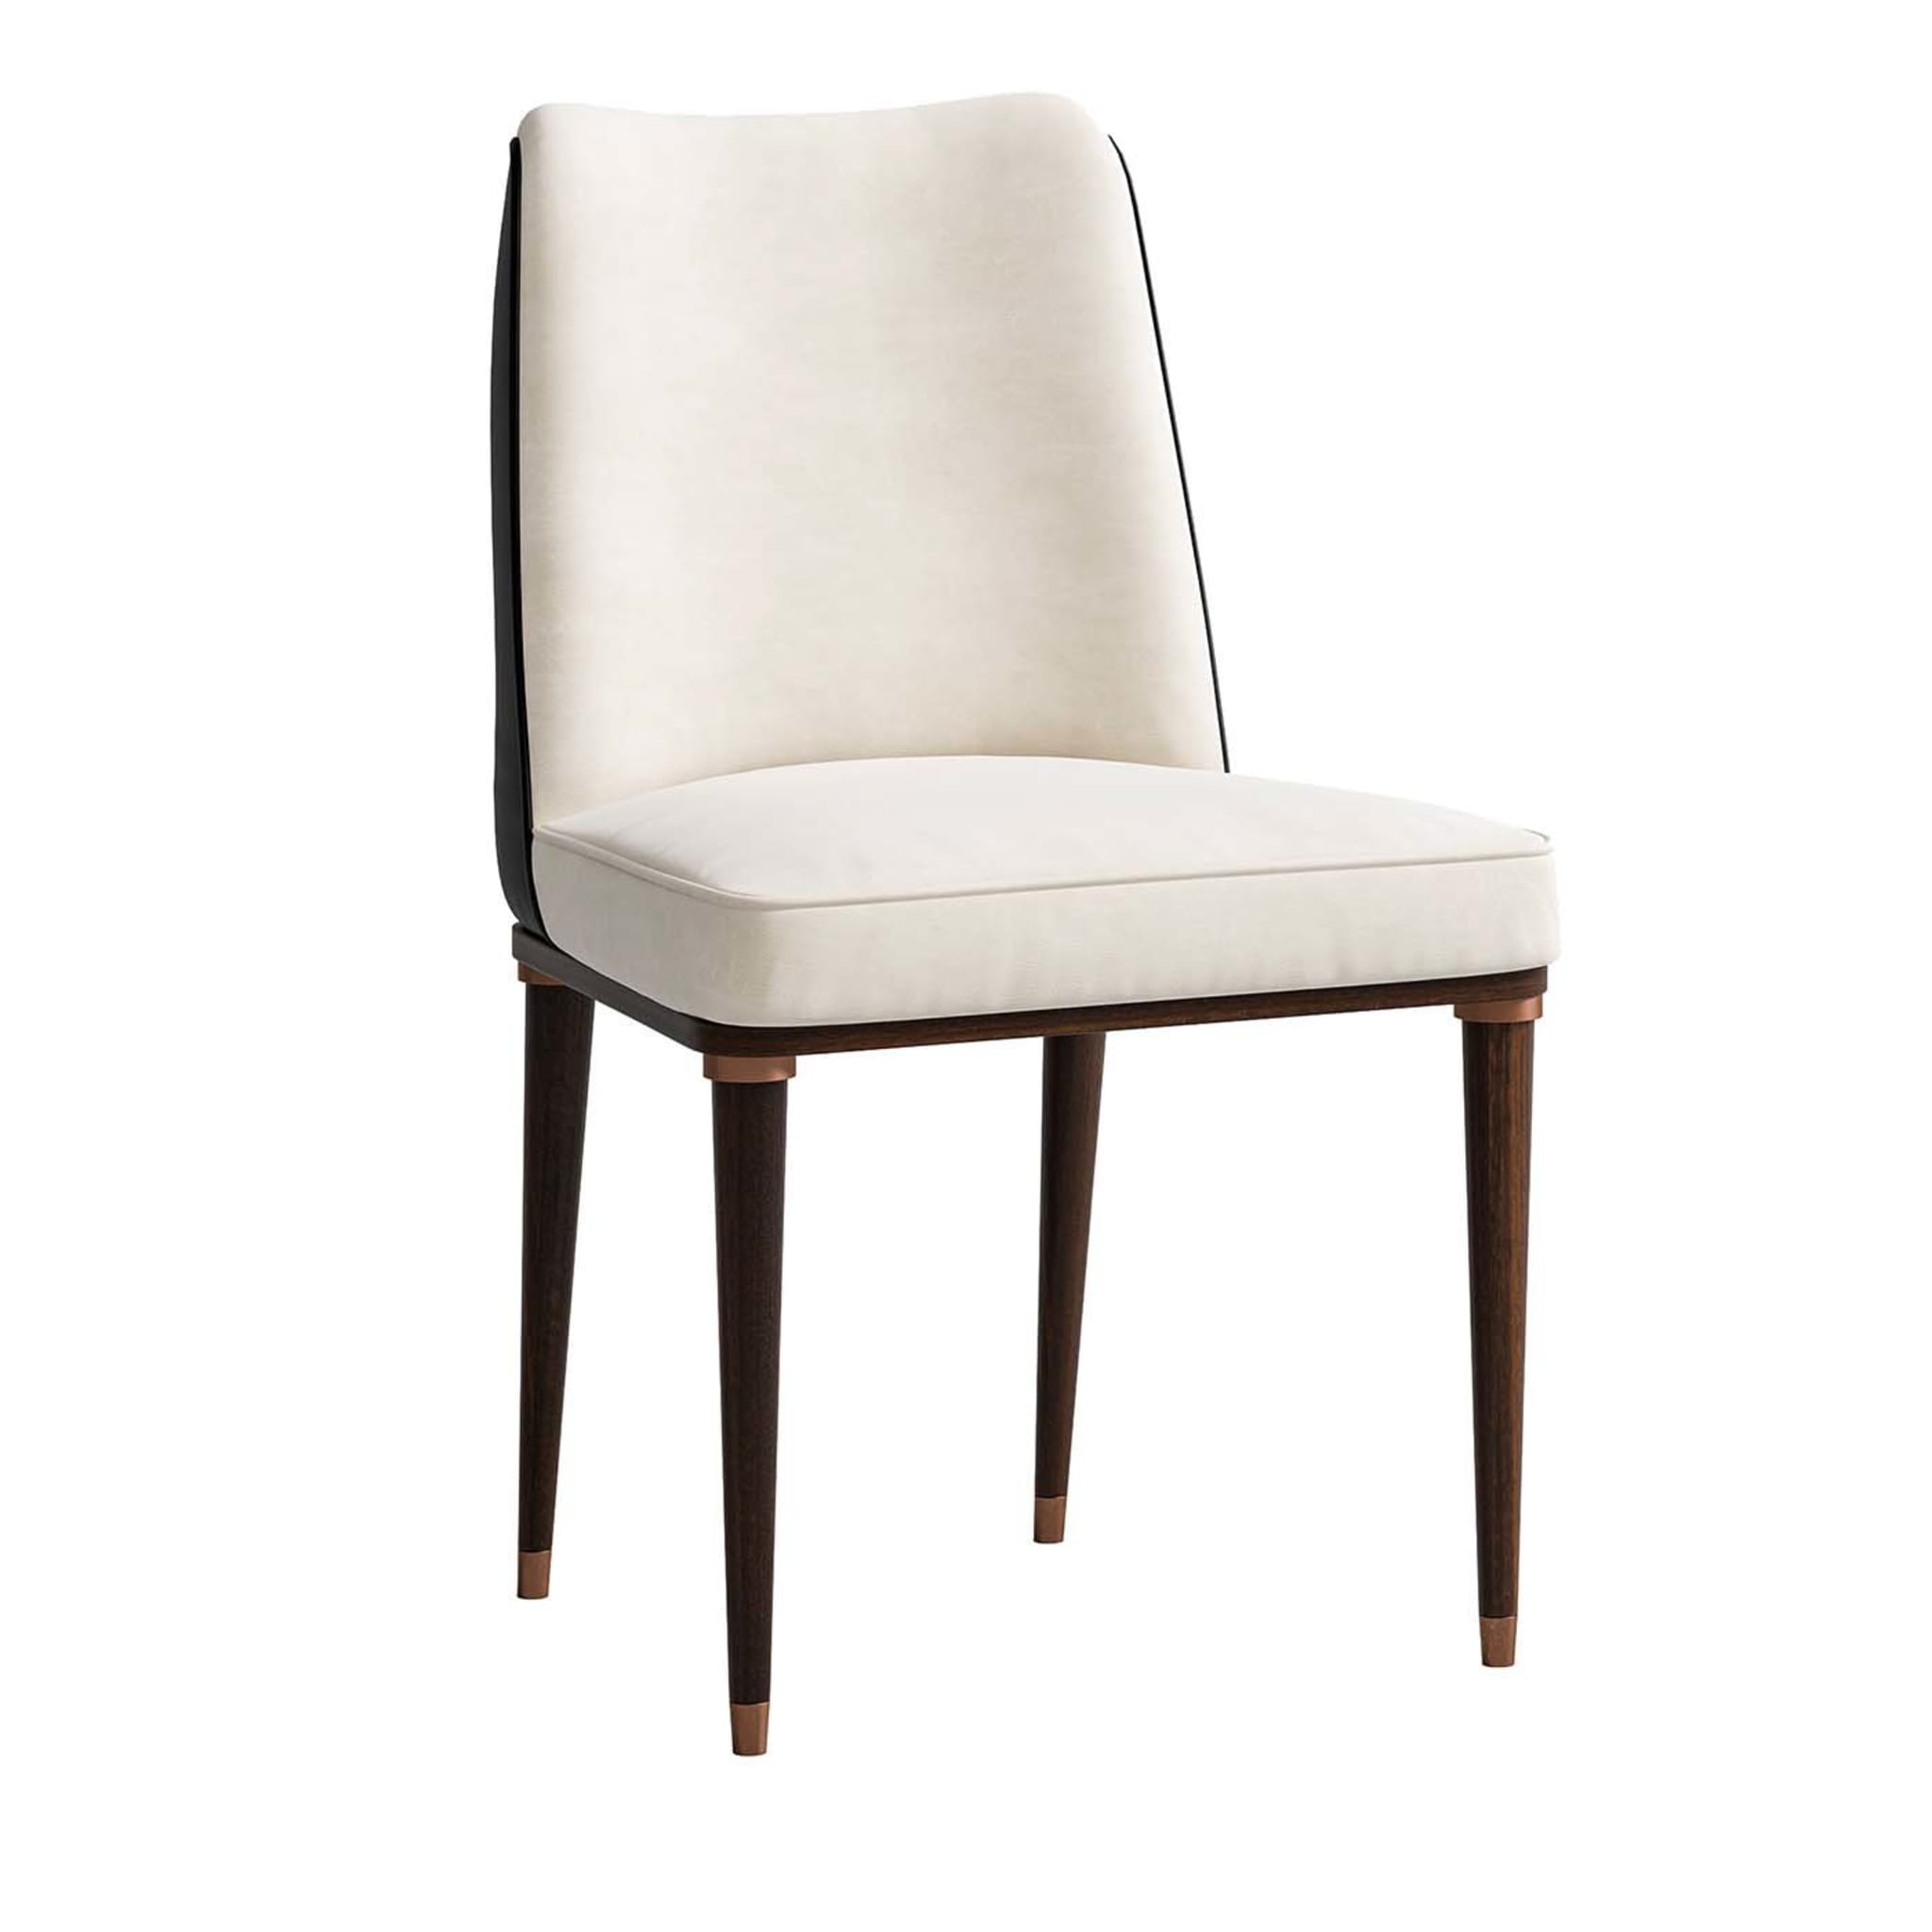 White Leather Dining Chair - Main view